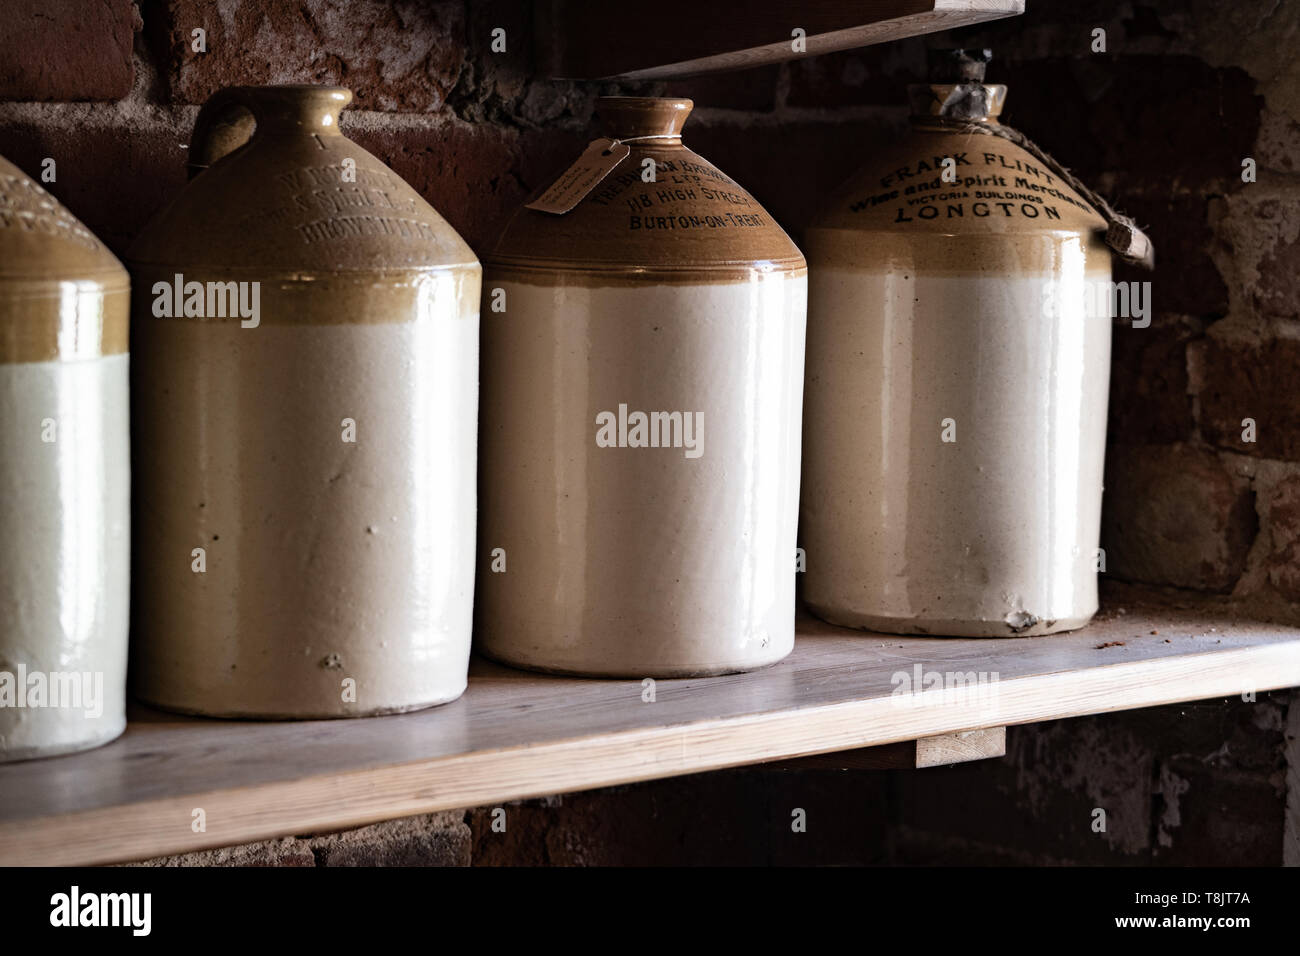 Stone jars in a pantry used for storing oil, cider or other liquids Stock Photo